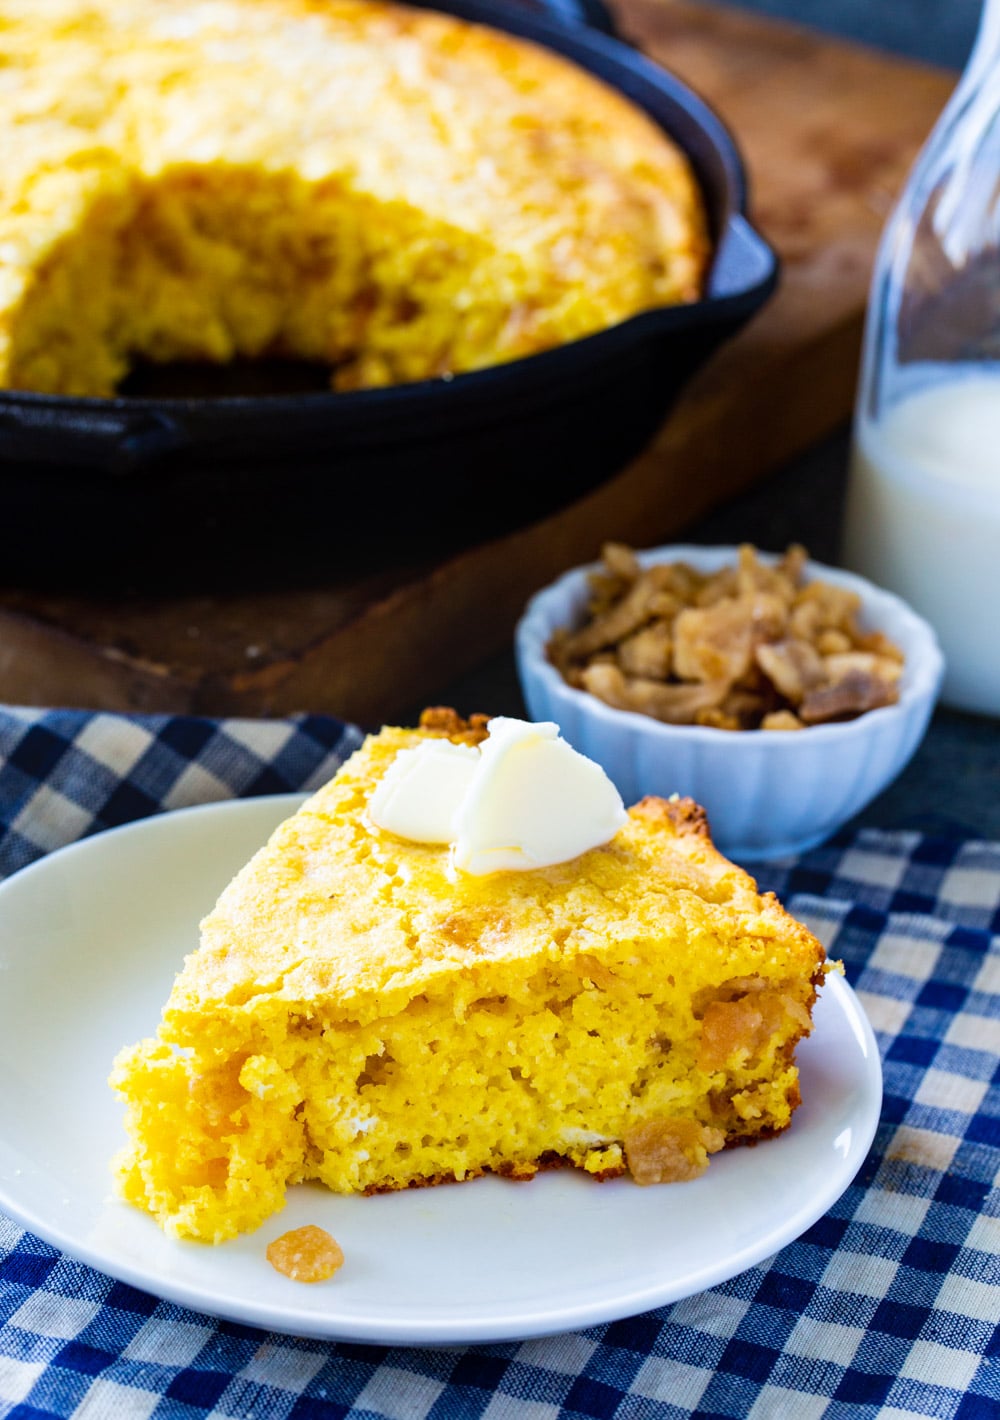 Slice of cornbread on a plate with casto iron pan full of cornbread in background.